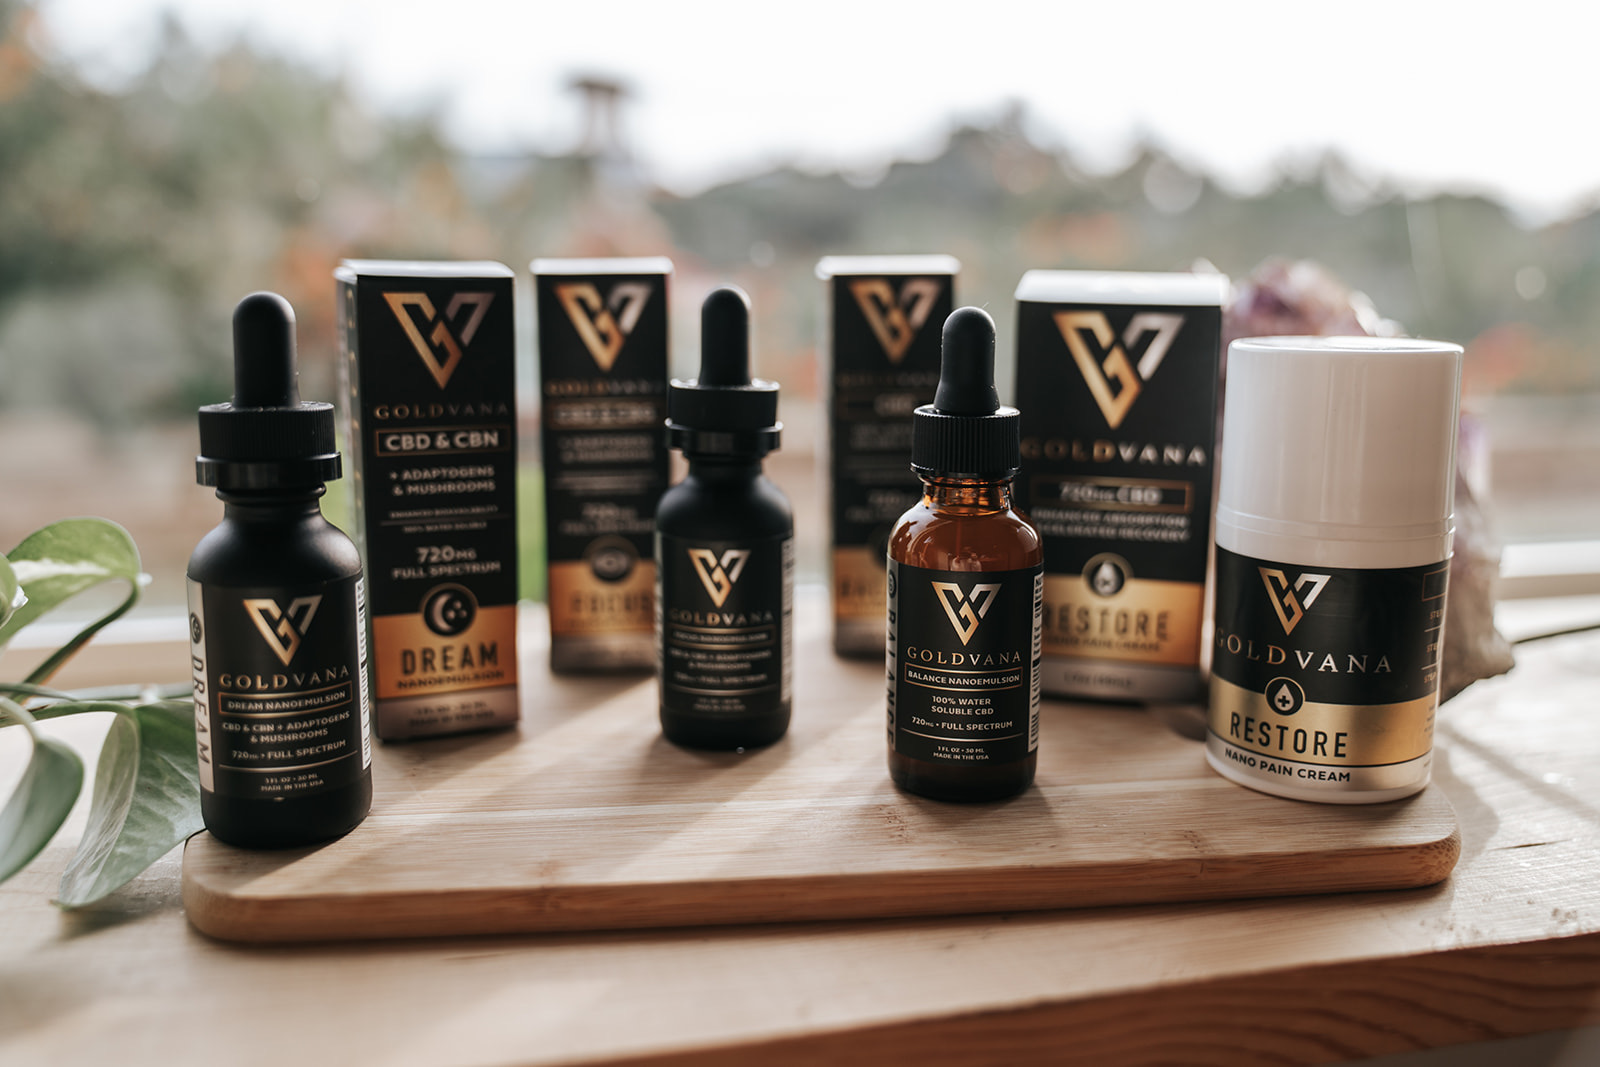 Goldvana's water-soluble functional tinctures and CBD pain cream standing on a wooden board